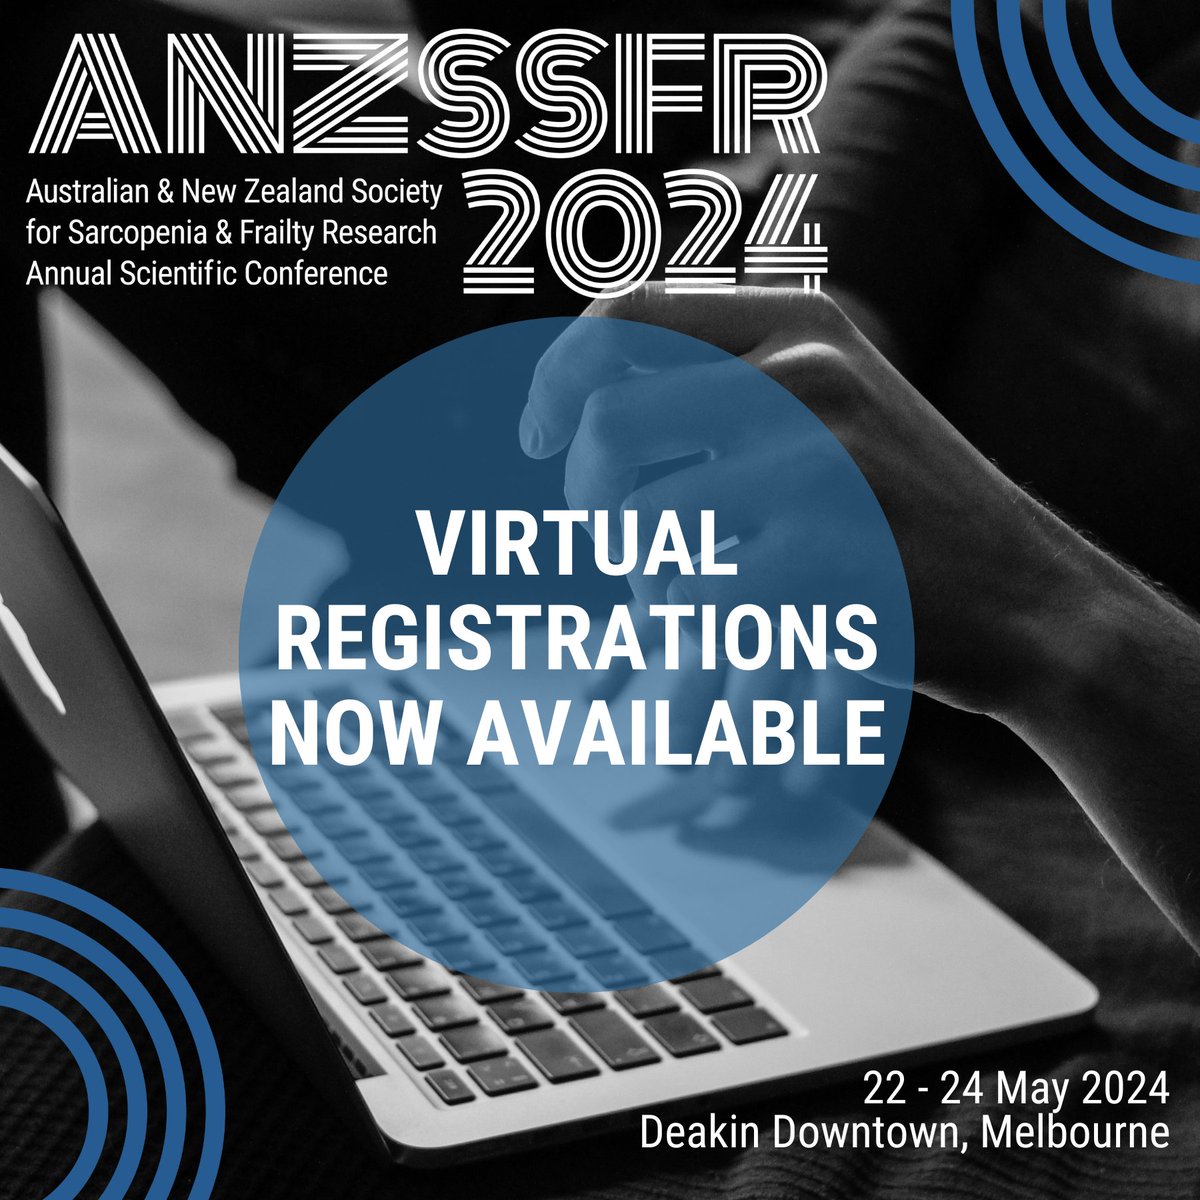 Want to hear from our fabulous speakers at the upcoming @ANZSSFR meeting? But can’t get to Melbourne in person? Good news: we now have last-minute virtual registrations available! Details here: rb.gy/cvrmmo Please share with your networks! 🙏